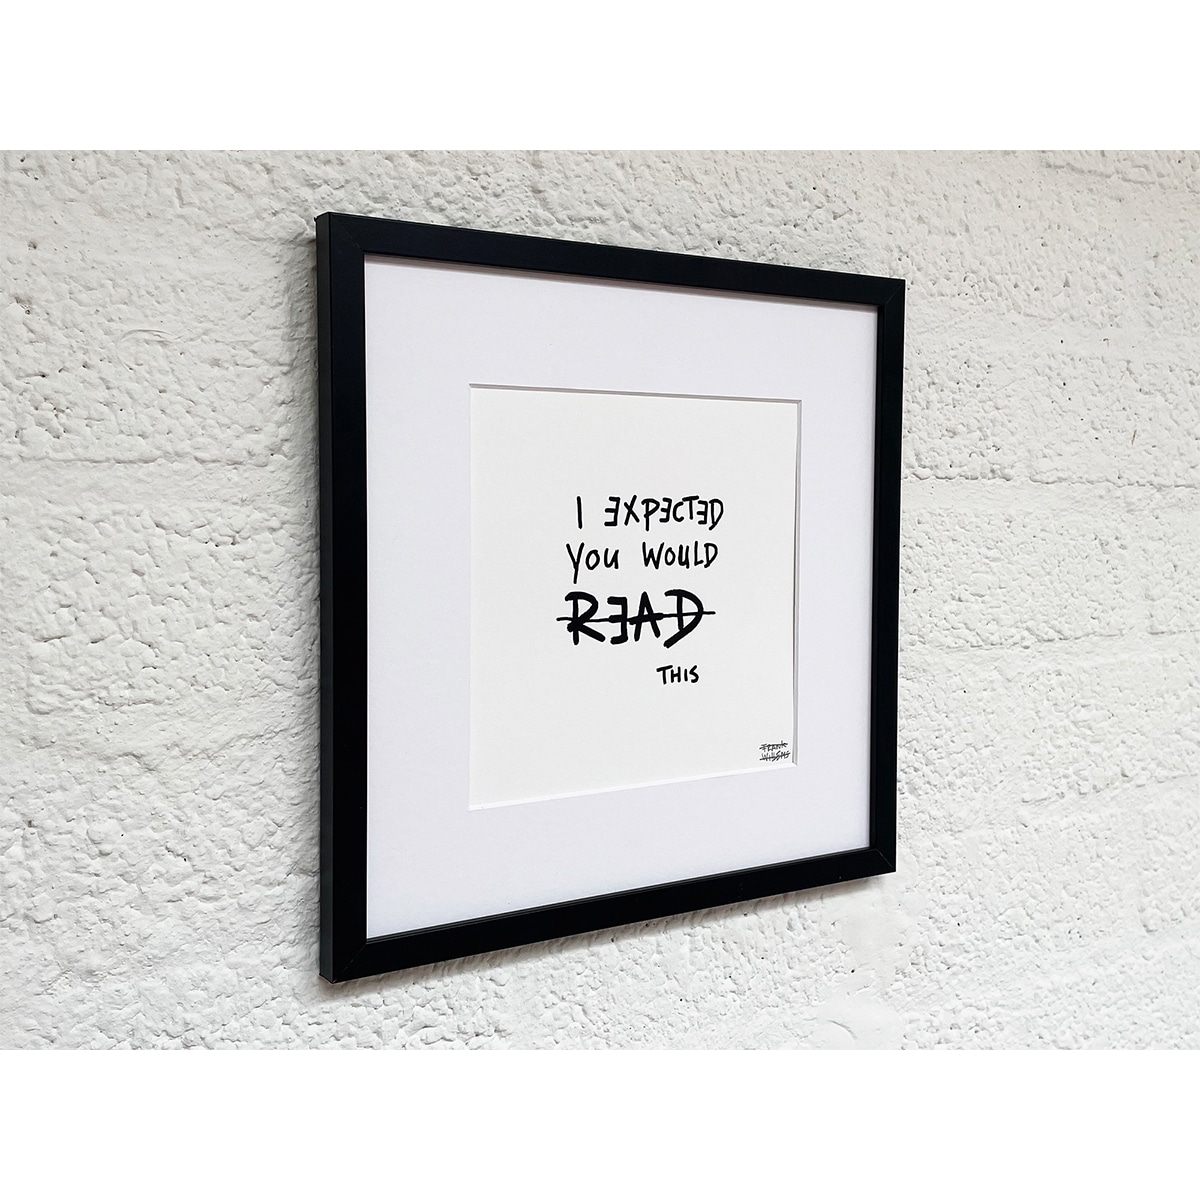 Limited Edt. Text Print – I EXPECTED YOU WOULD READ THIS